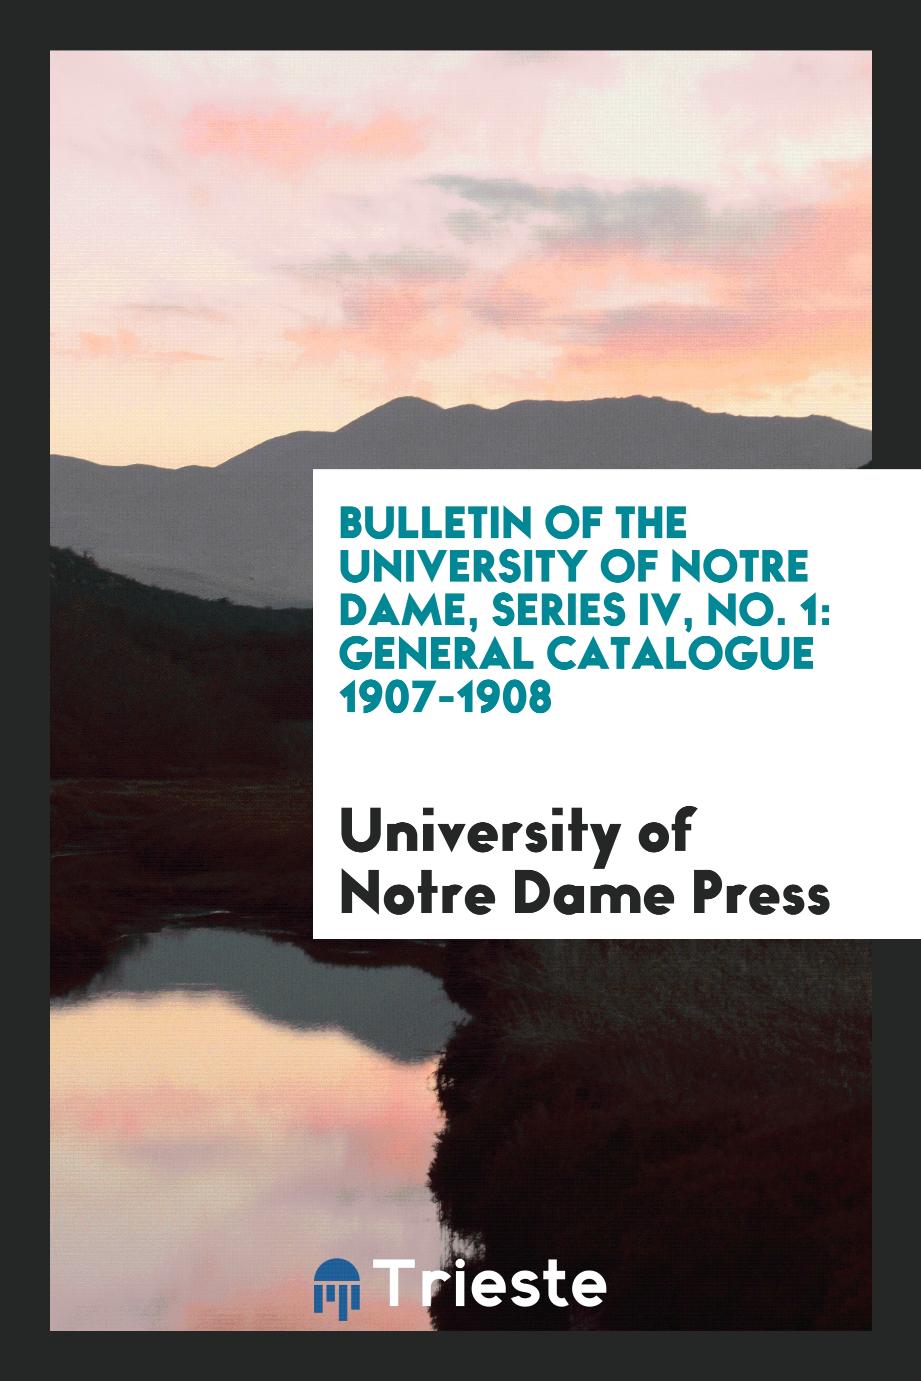 Bulletin of the University of Notre Dame, Series IV, No. 1: General Catalogue 1907-1908